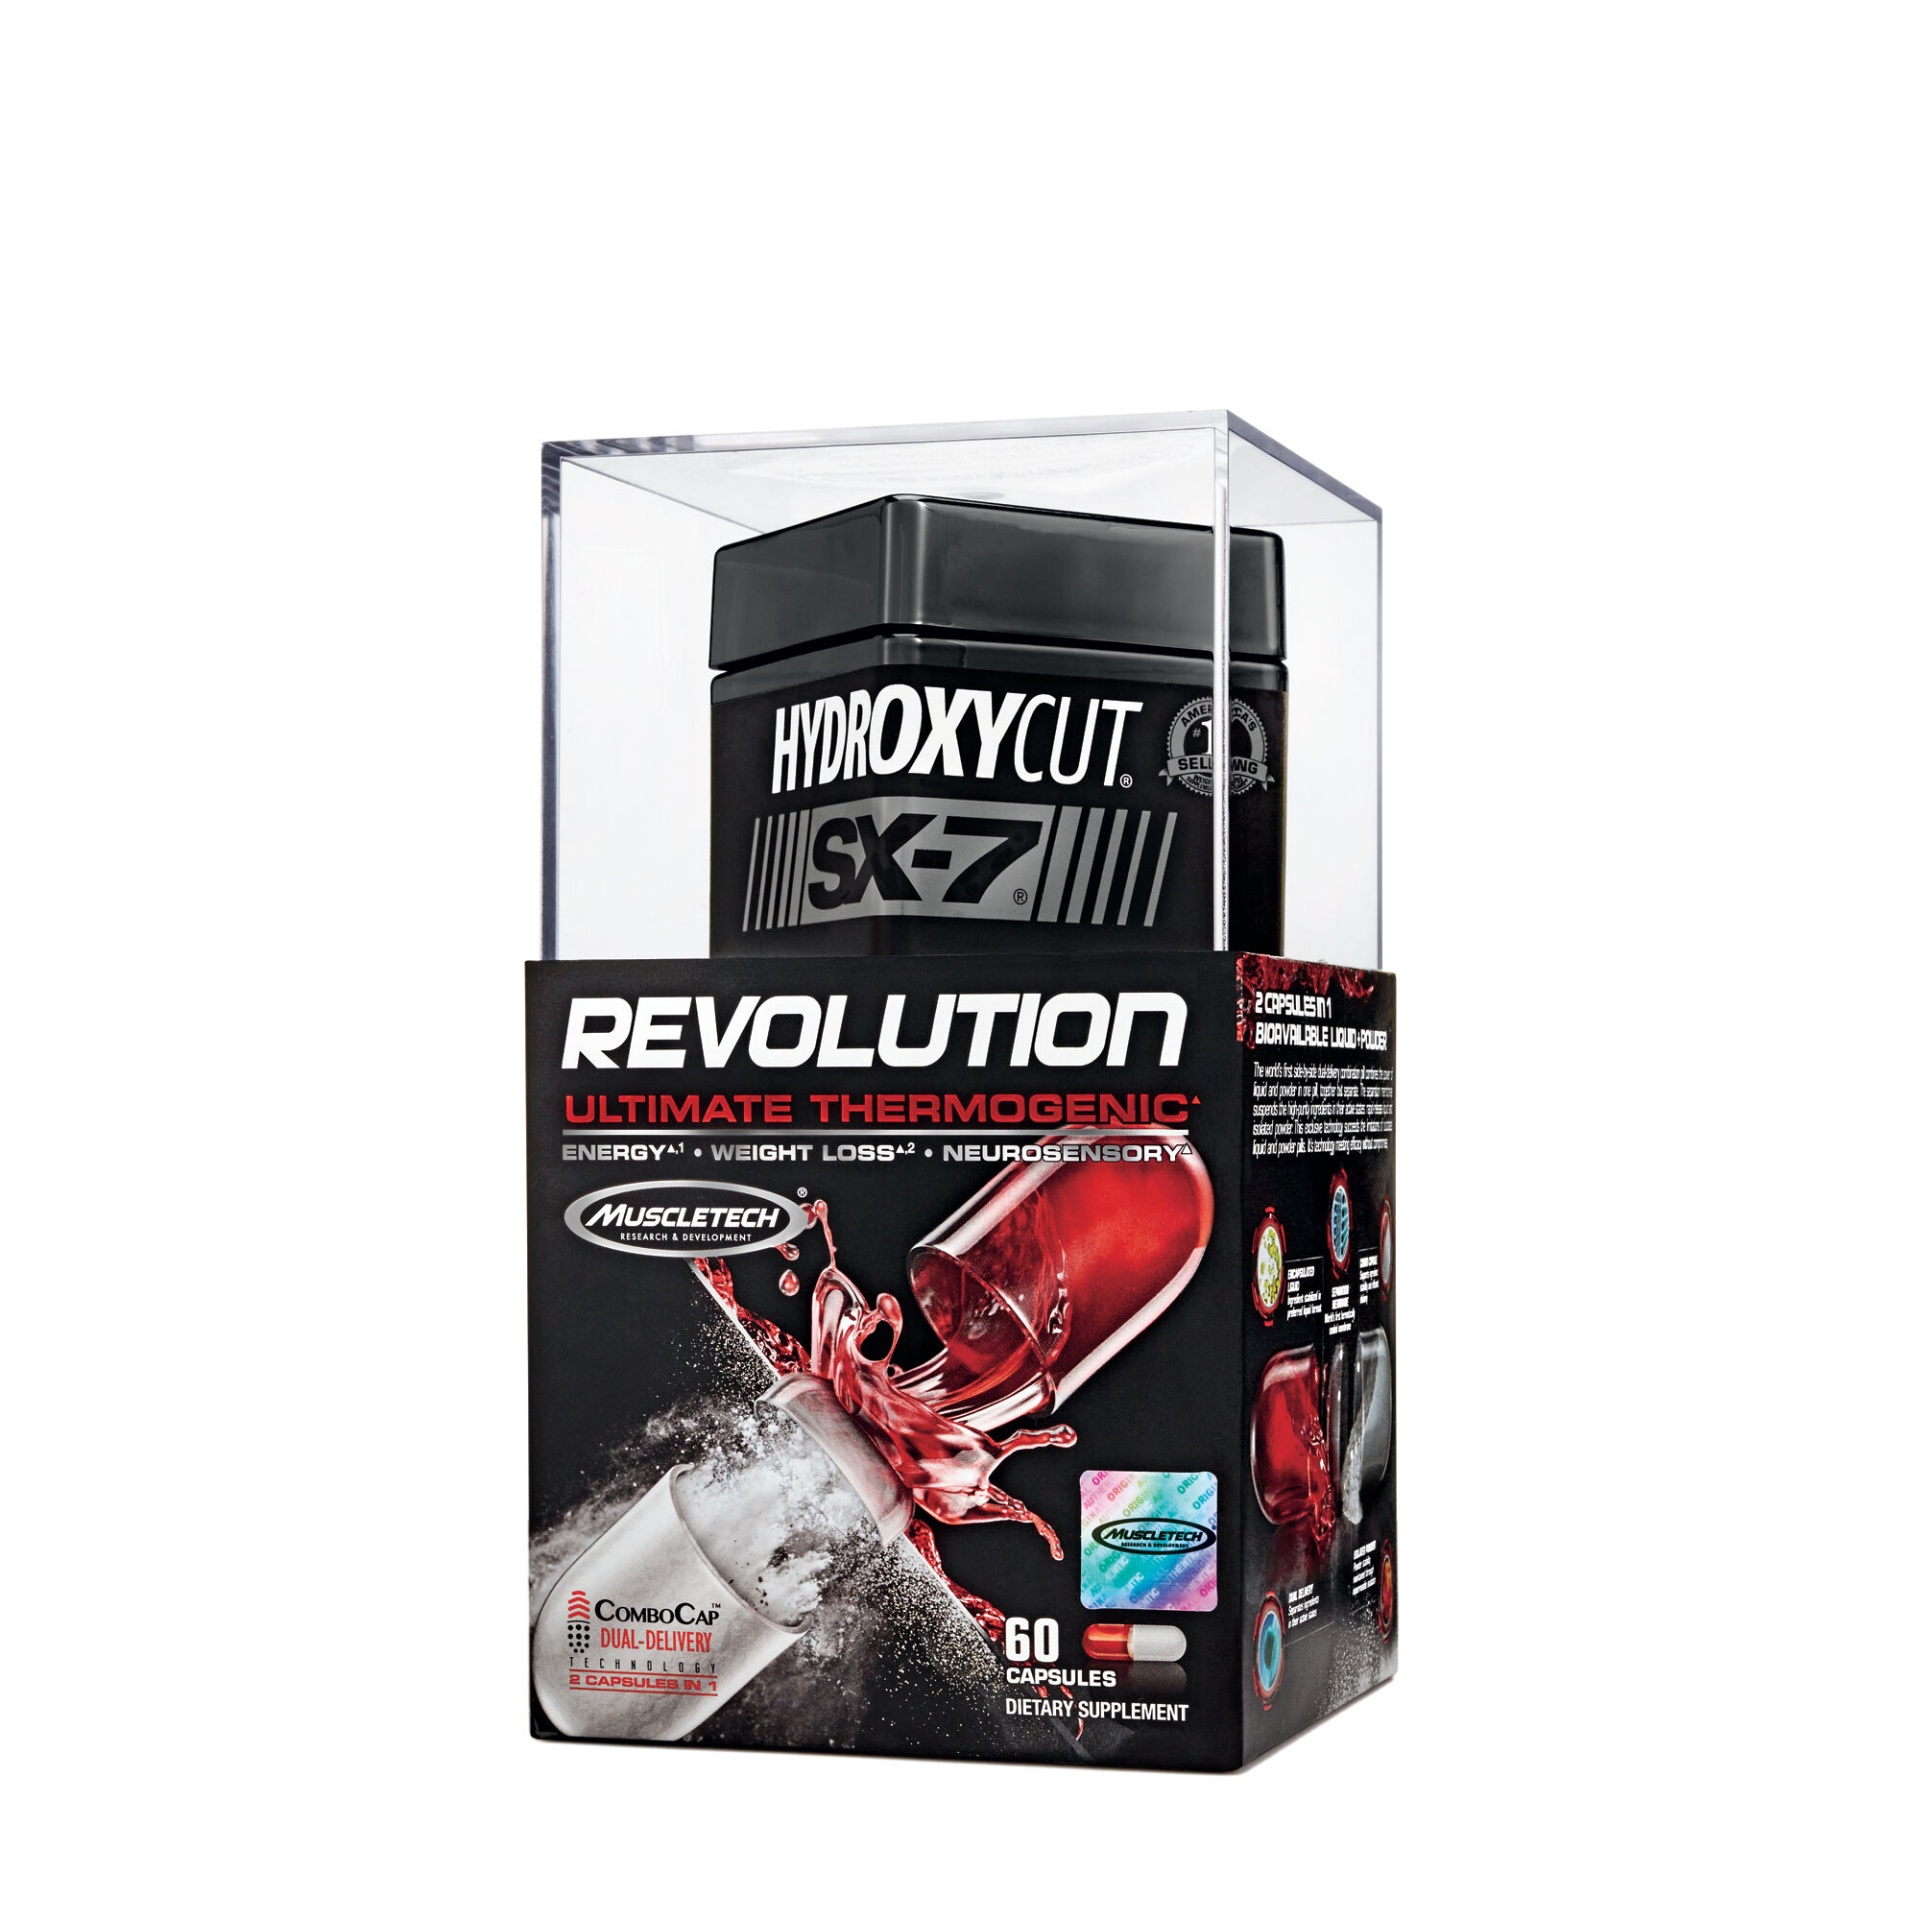 slide 1 of 1, Hydroxycut SX-7 Revolution Ultimate Thermogenic, 60 ct